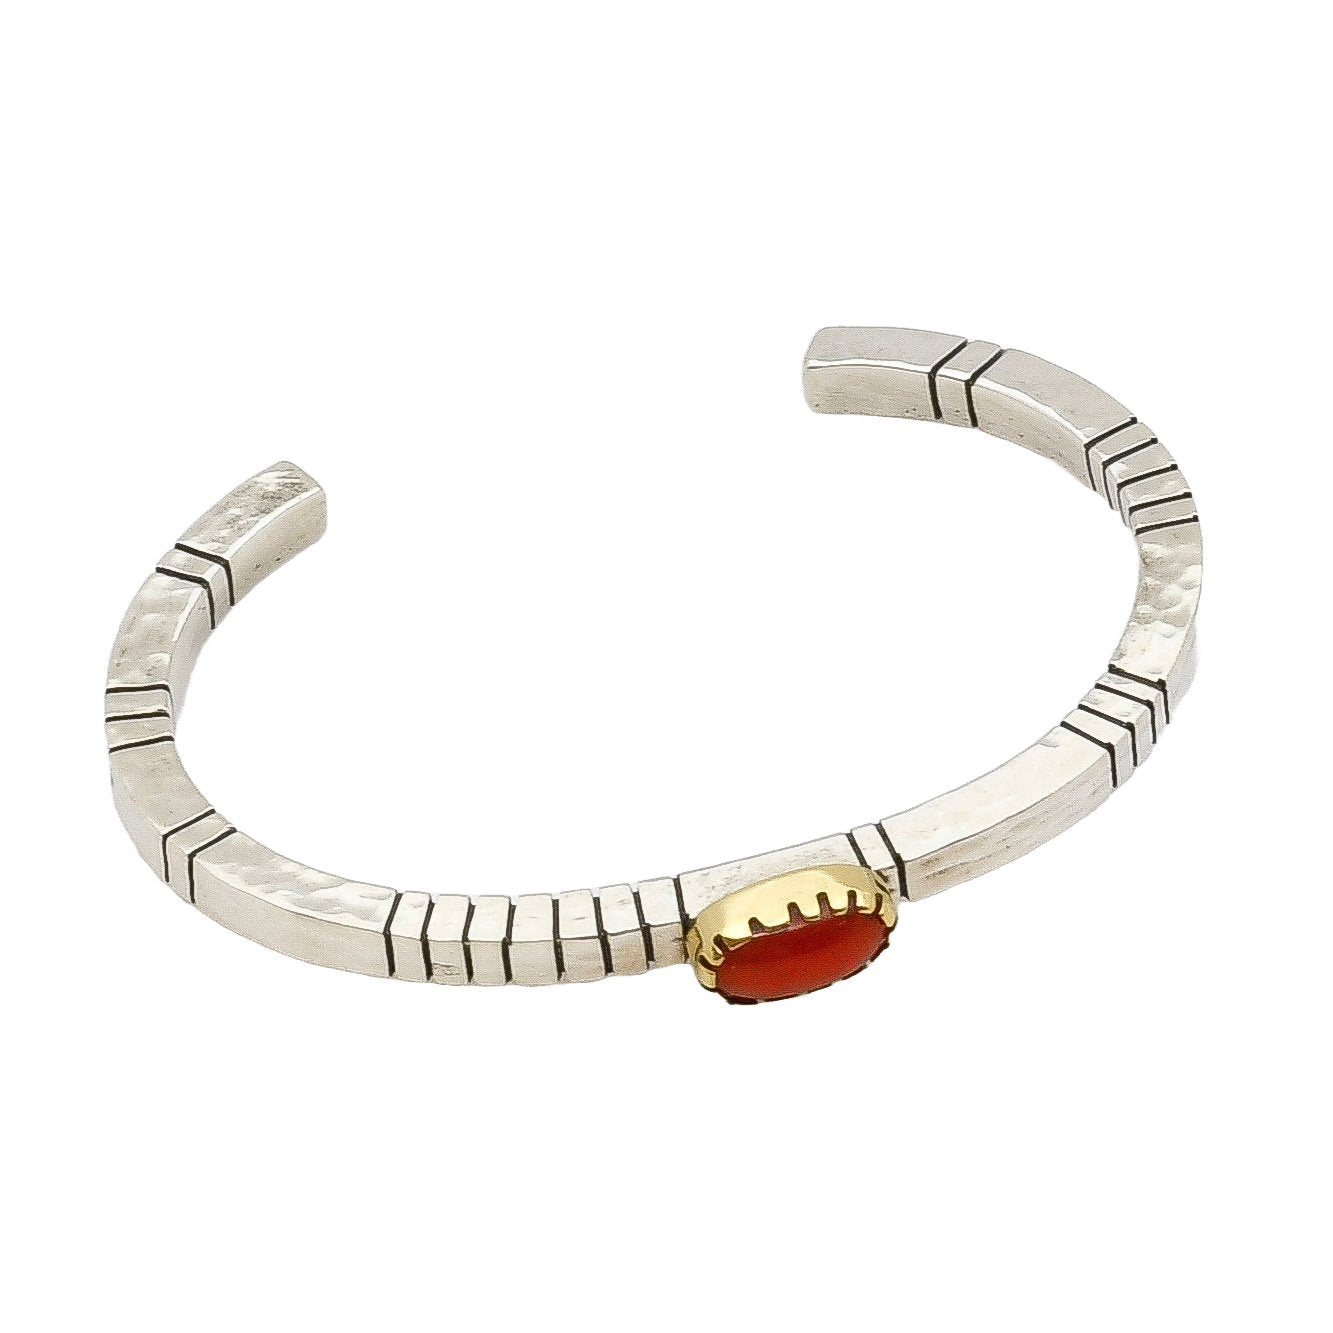 Gail Bird and Yazzie Johnson Bracelet of Natural Red Mediterranean Coral - Turquoise & Tufa